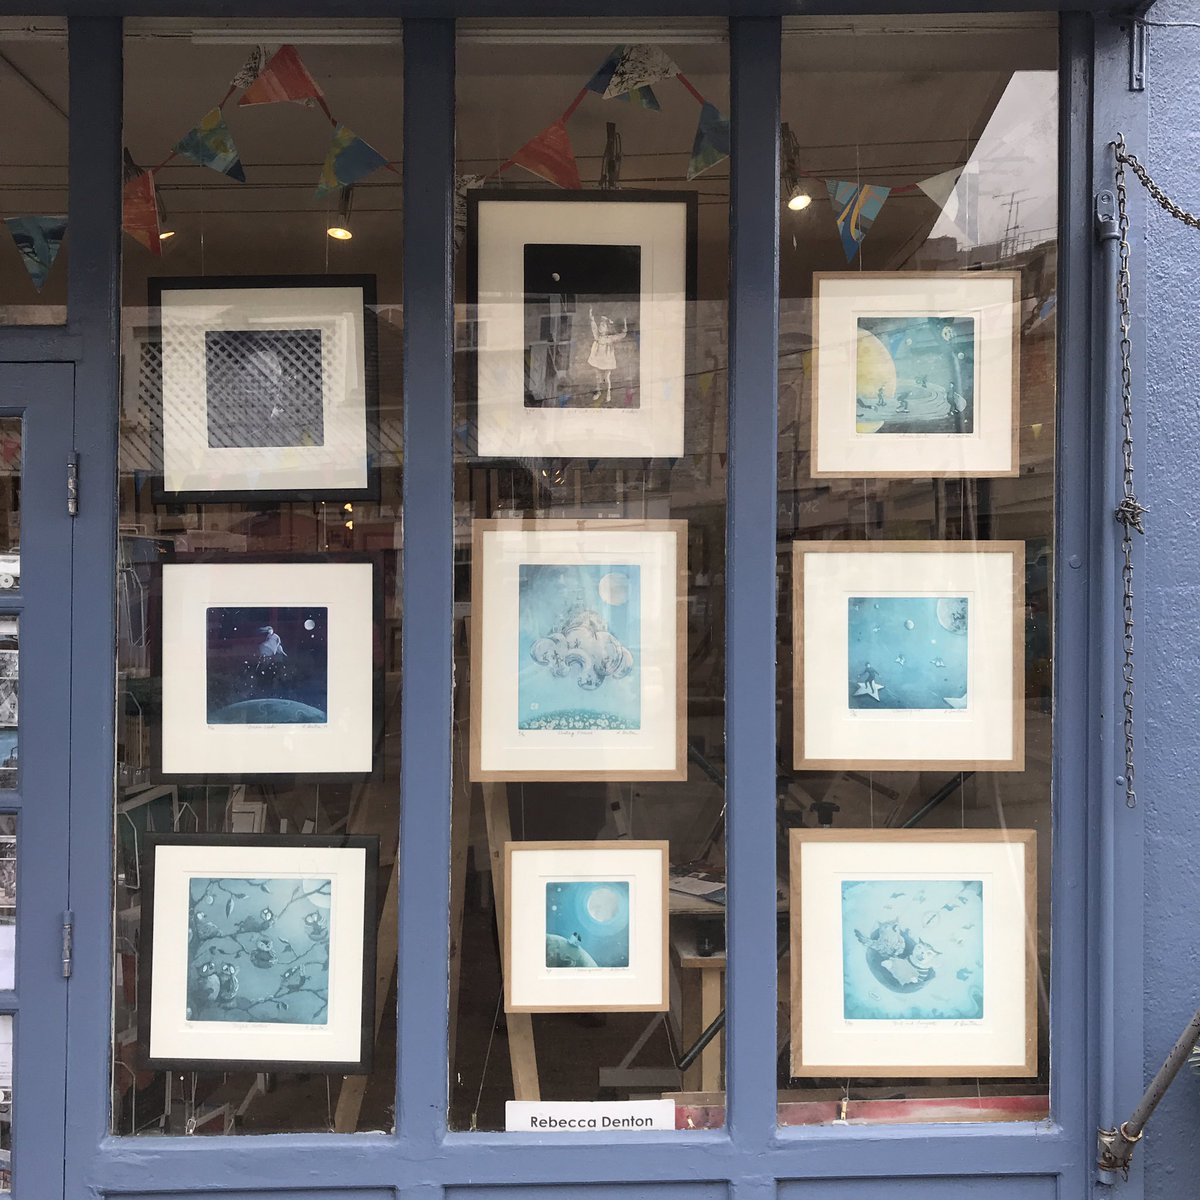 Join us this afternoon for the private view of our new exhibition. Rebecca Denton, our Artist in Focus, will be doing a print demonstration with Theresa Pateman as part of the Lambeth Open @LambethOpen #printmaking #artforsale #etching @RebdentonArt @theresapateman @GabrielsWharf